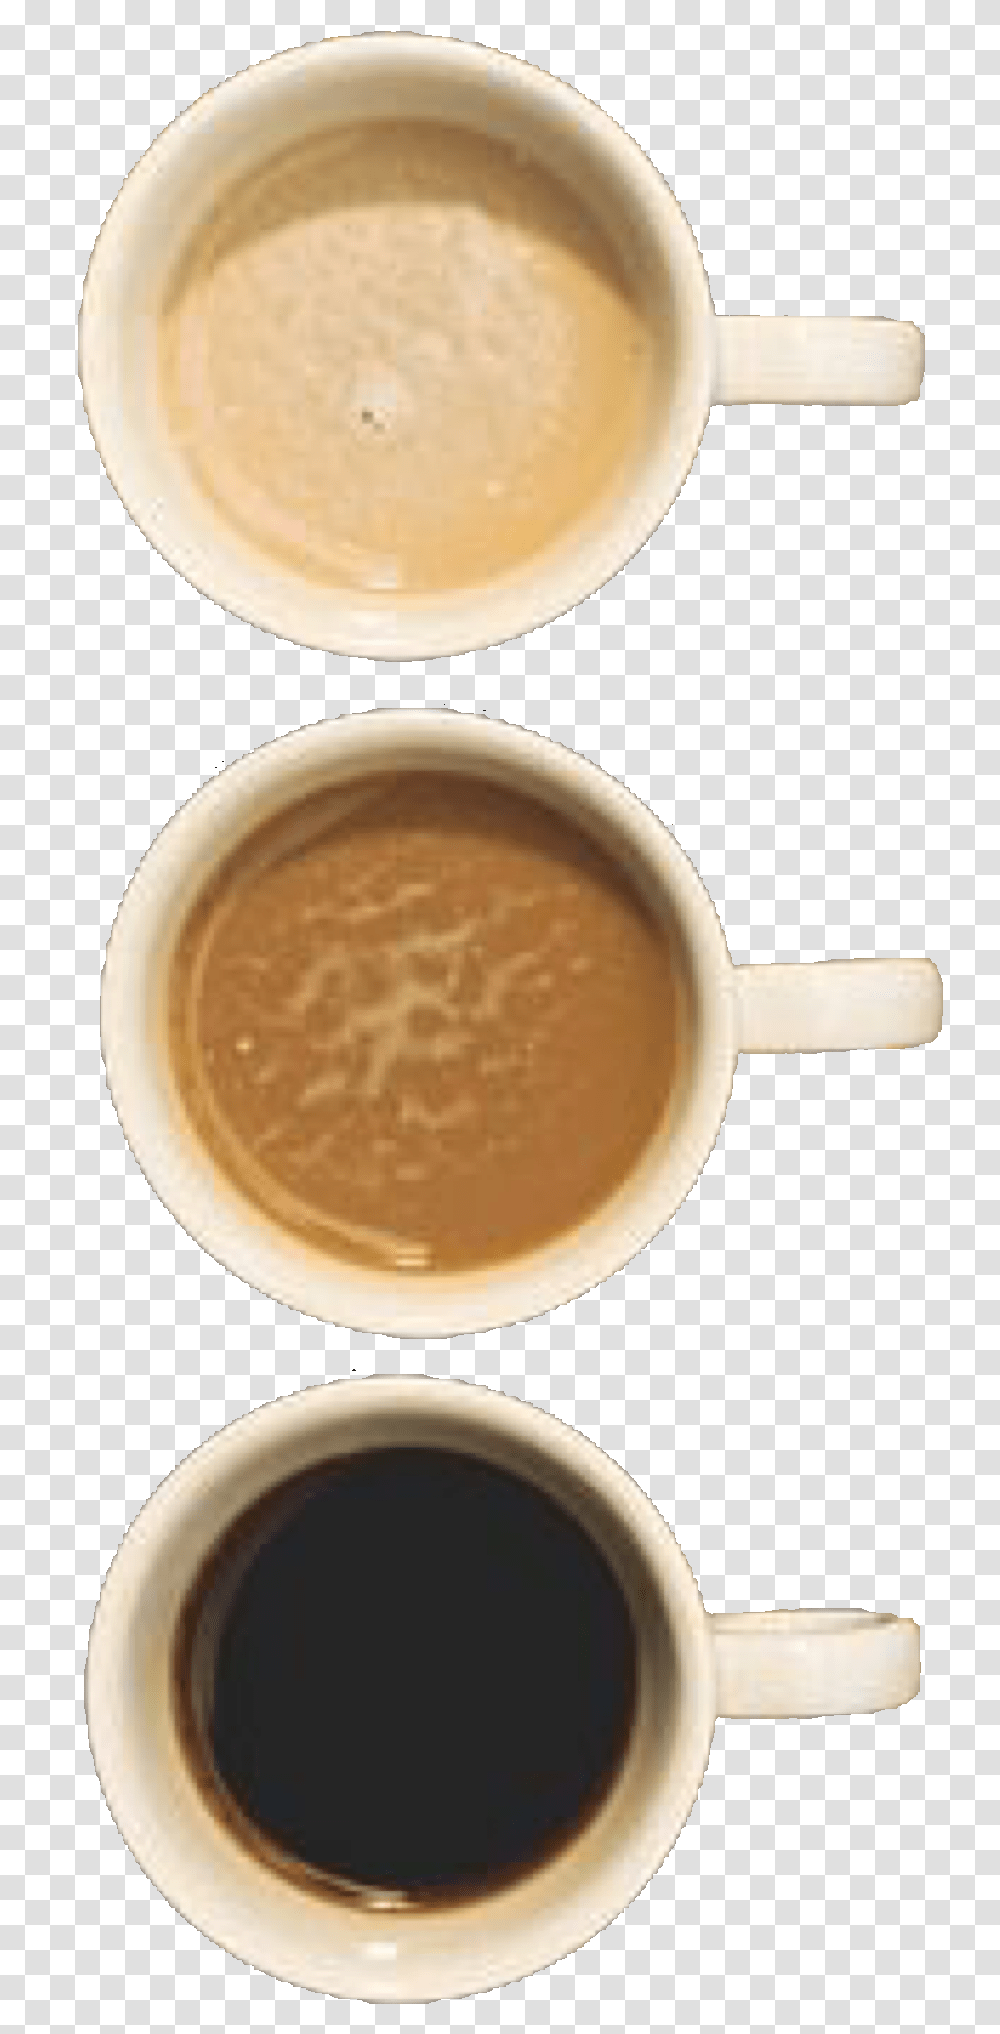 Measuring Cup Of Water Clipart Cuban Espresso, Coffee Cup, Latte, Beverage, Drink Transparent Png